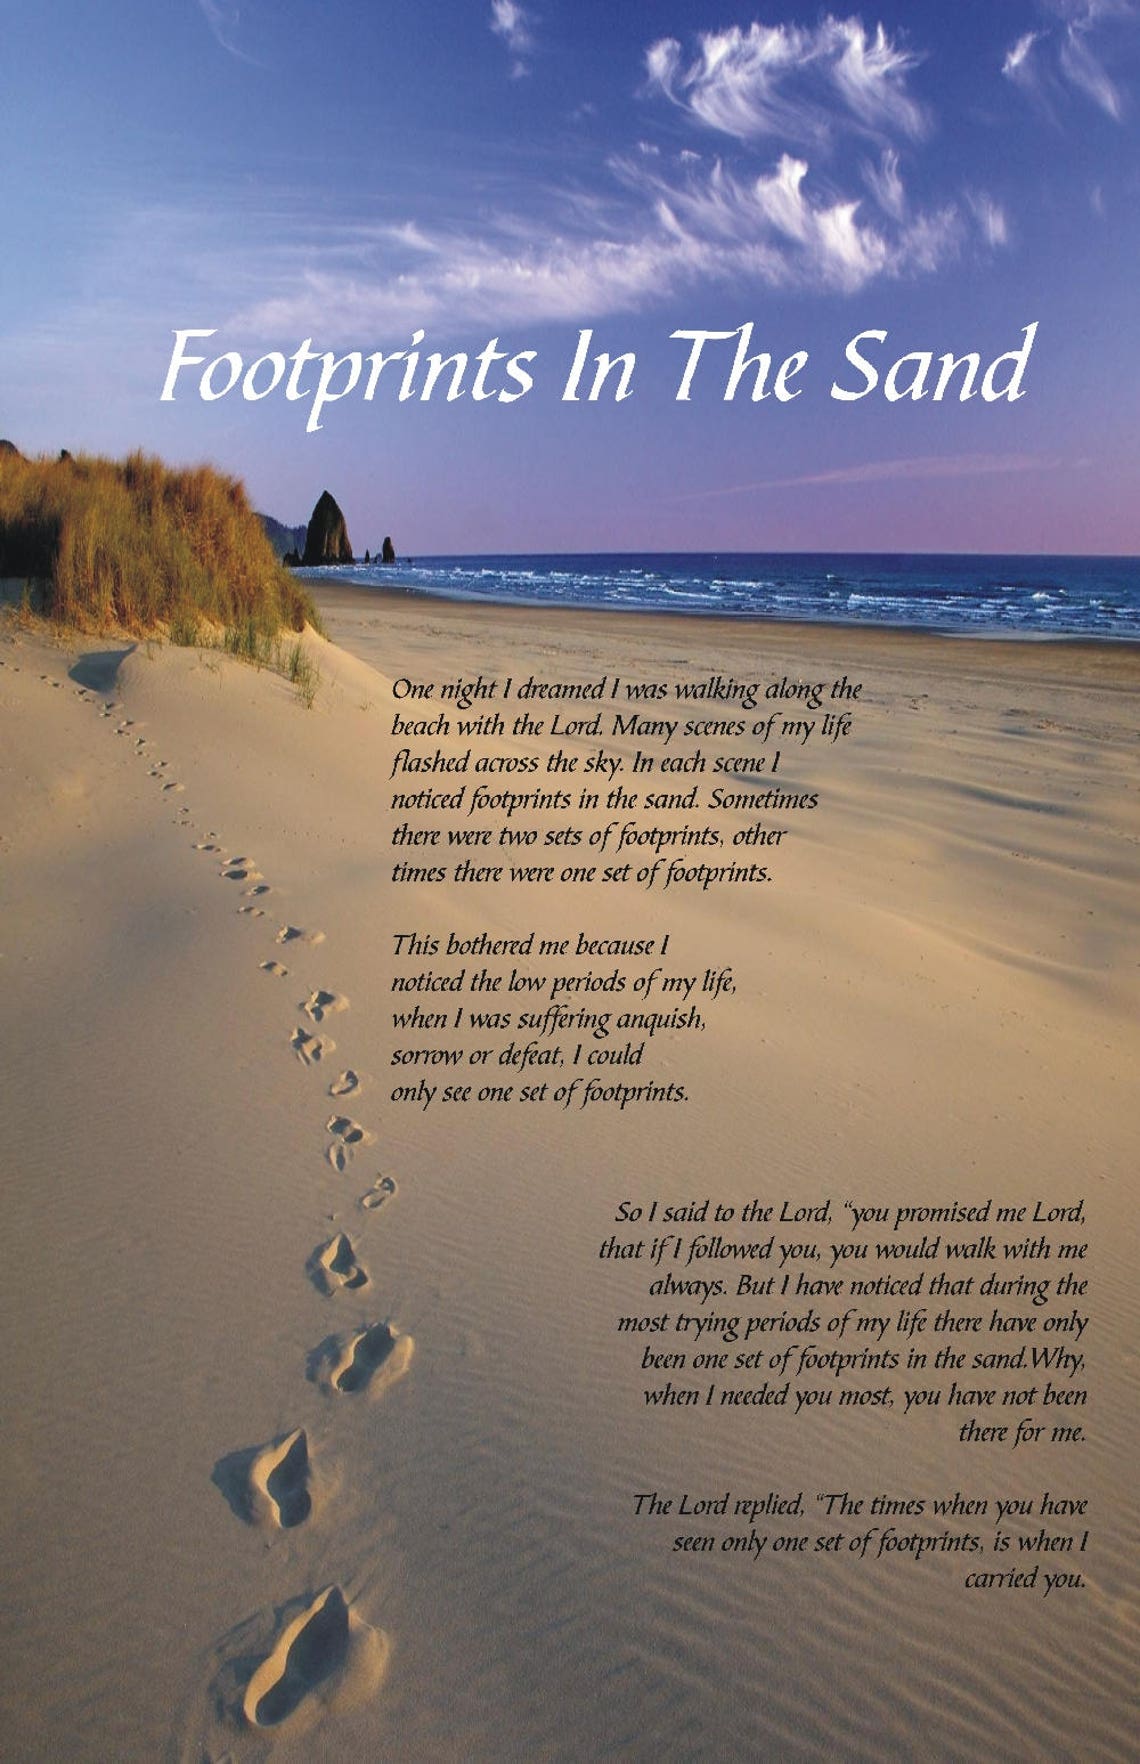 Footprints In The Sand Religious / Inspirational Poster size | Etsy